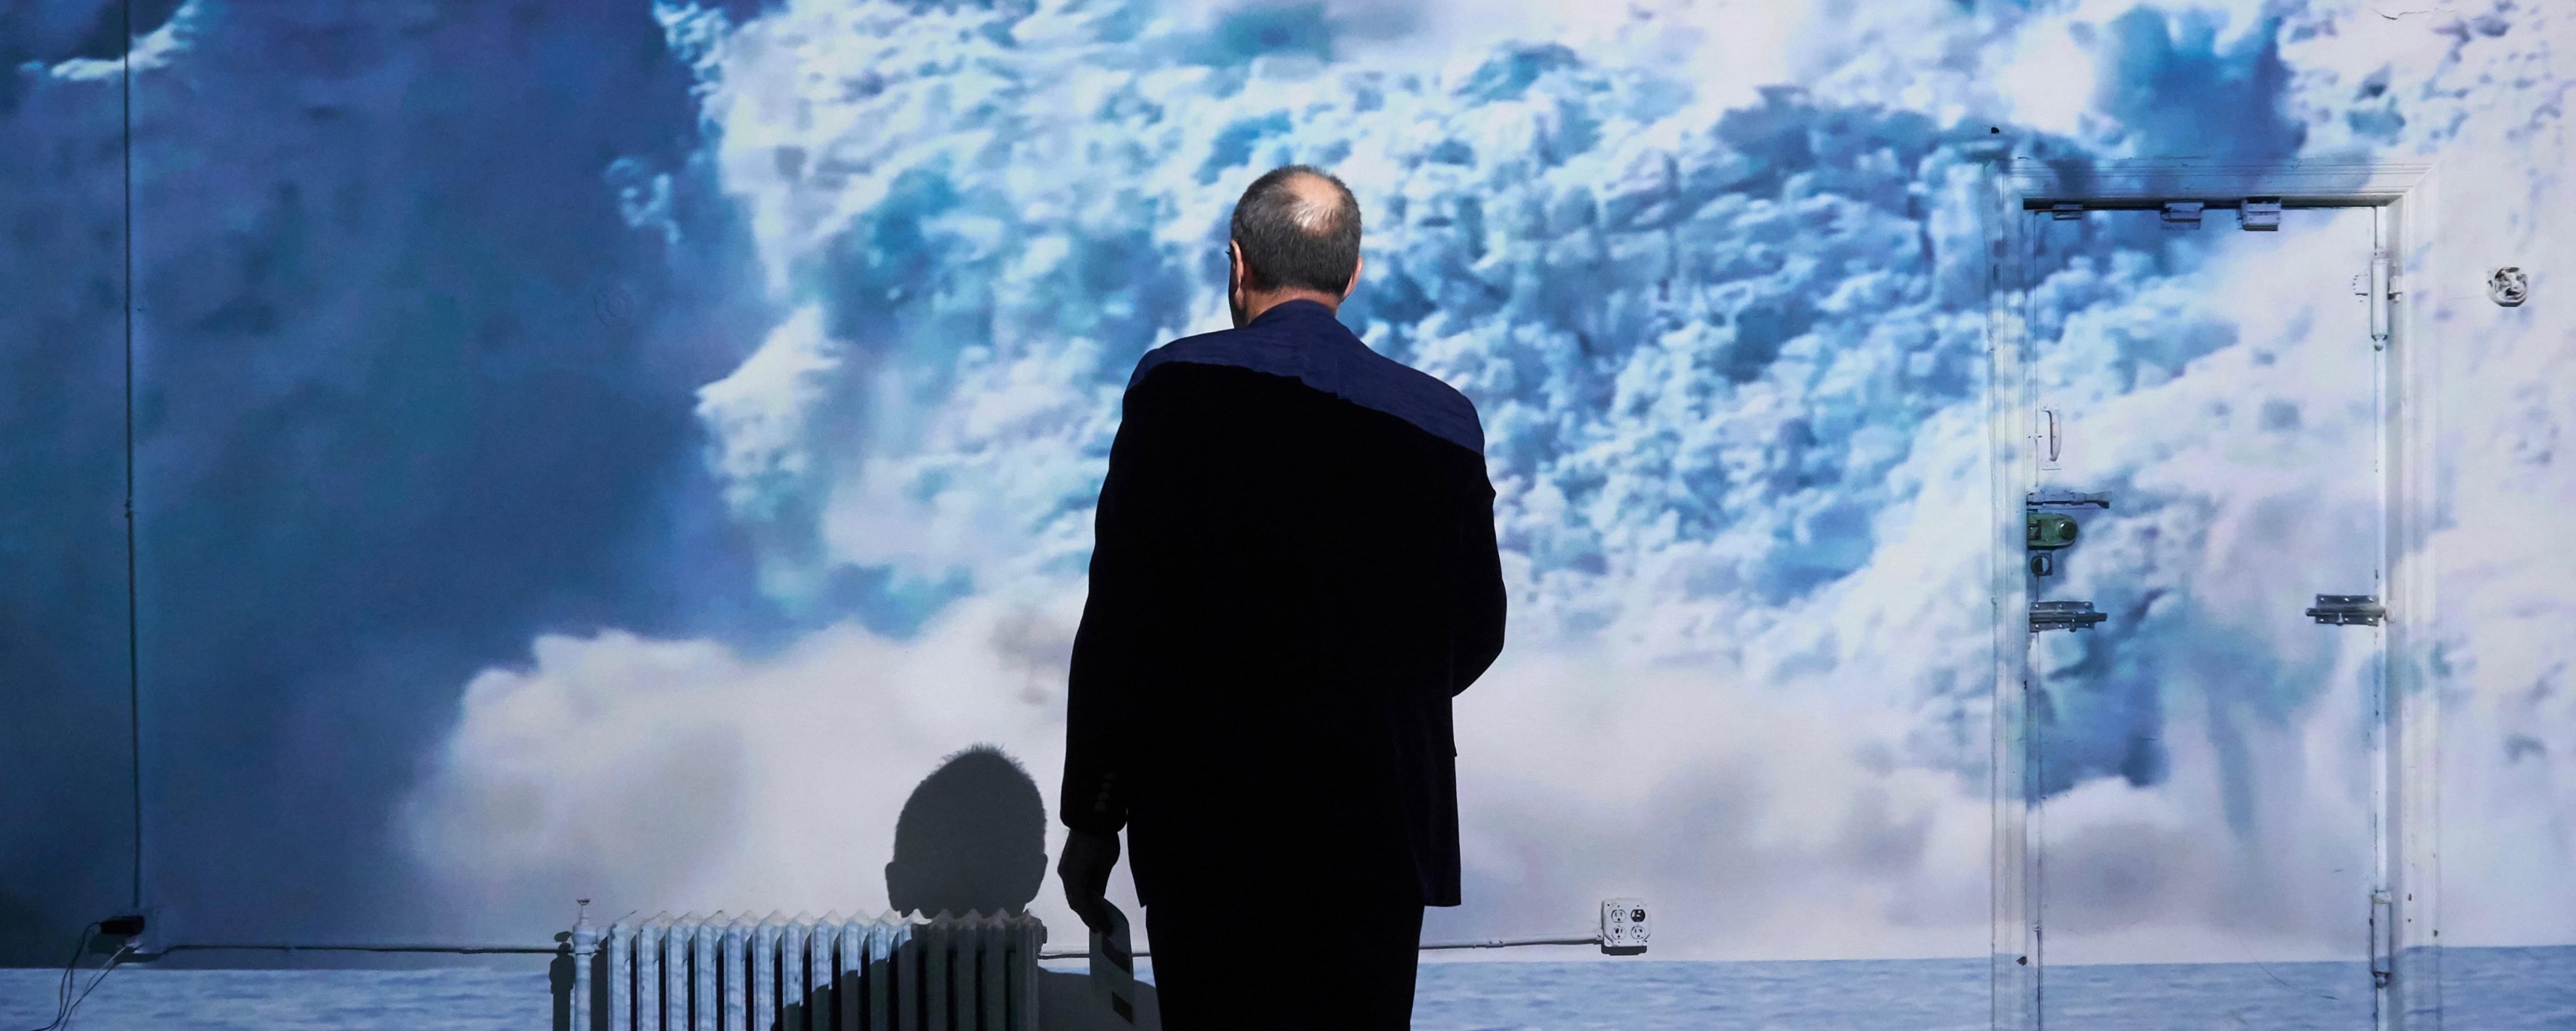 Photograph of the back of a man in a suit as he stares at a projection of a giant white glacier in front of him